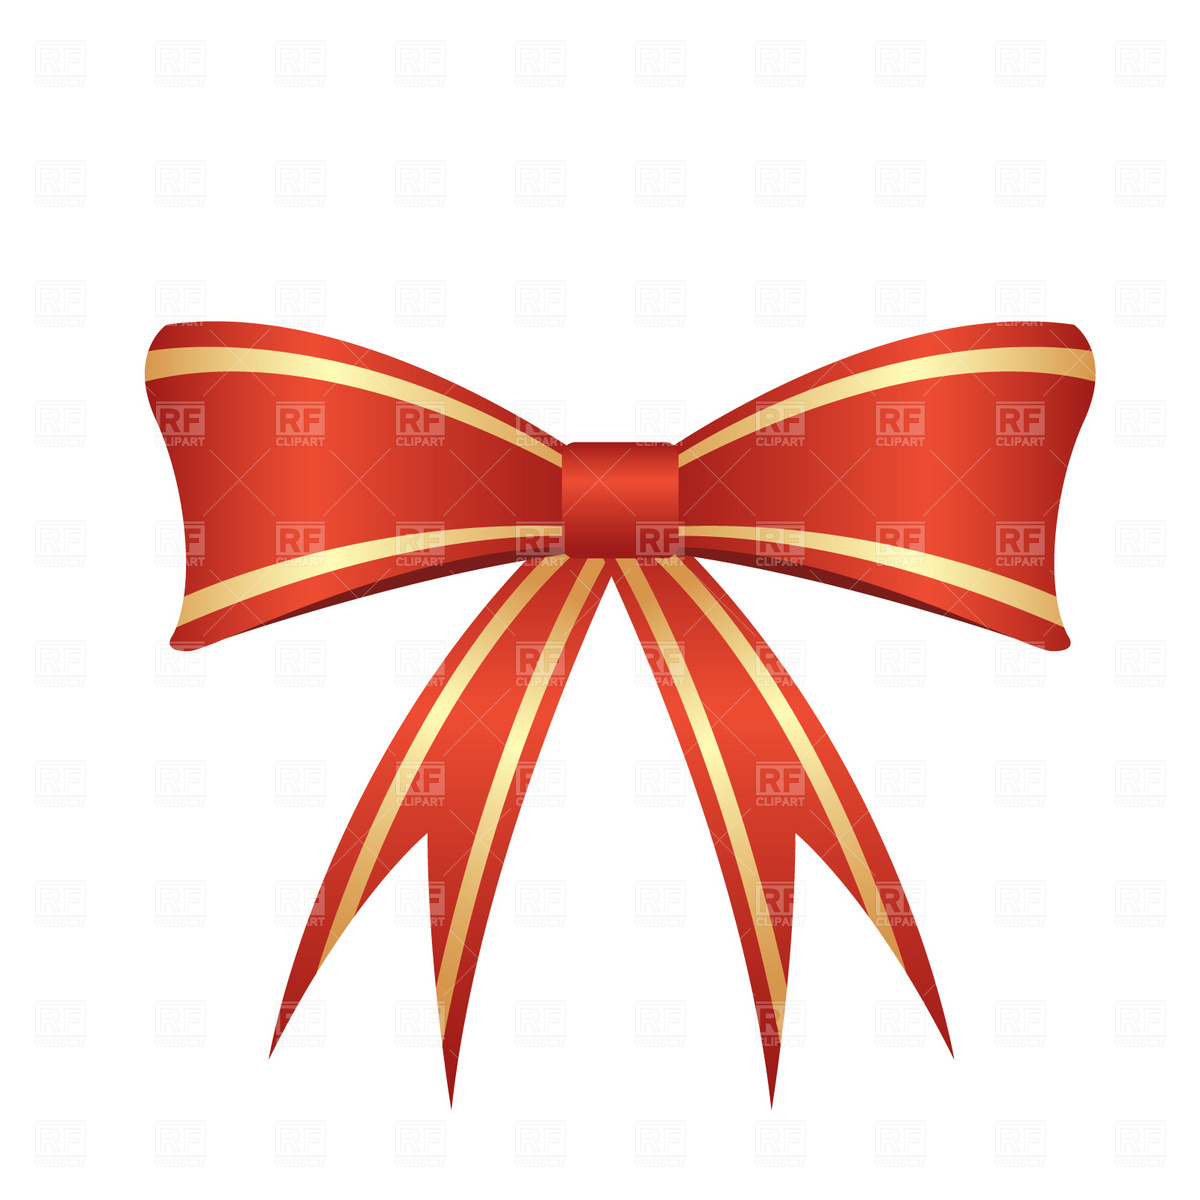 Red Bow 1855 Design Elements Download Royalty Free Vector Clipart